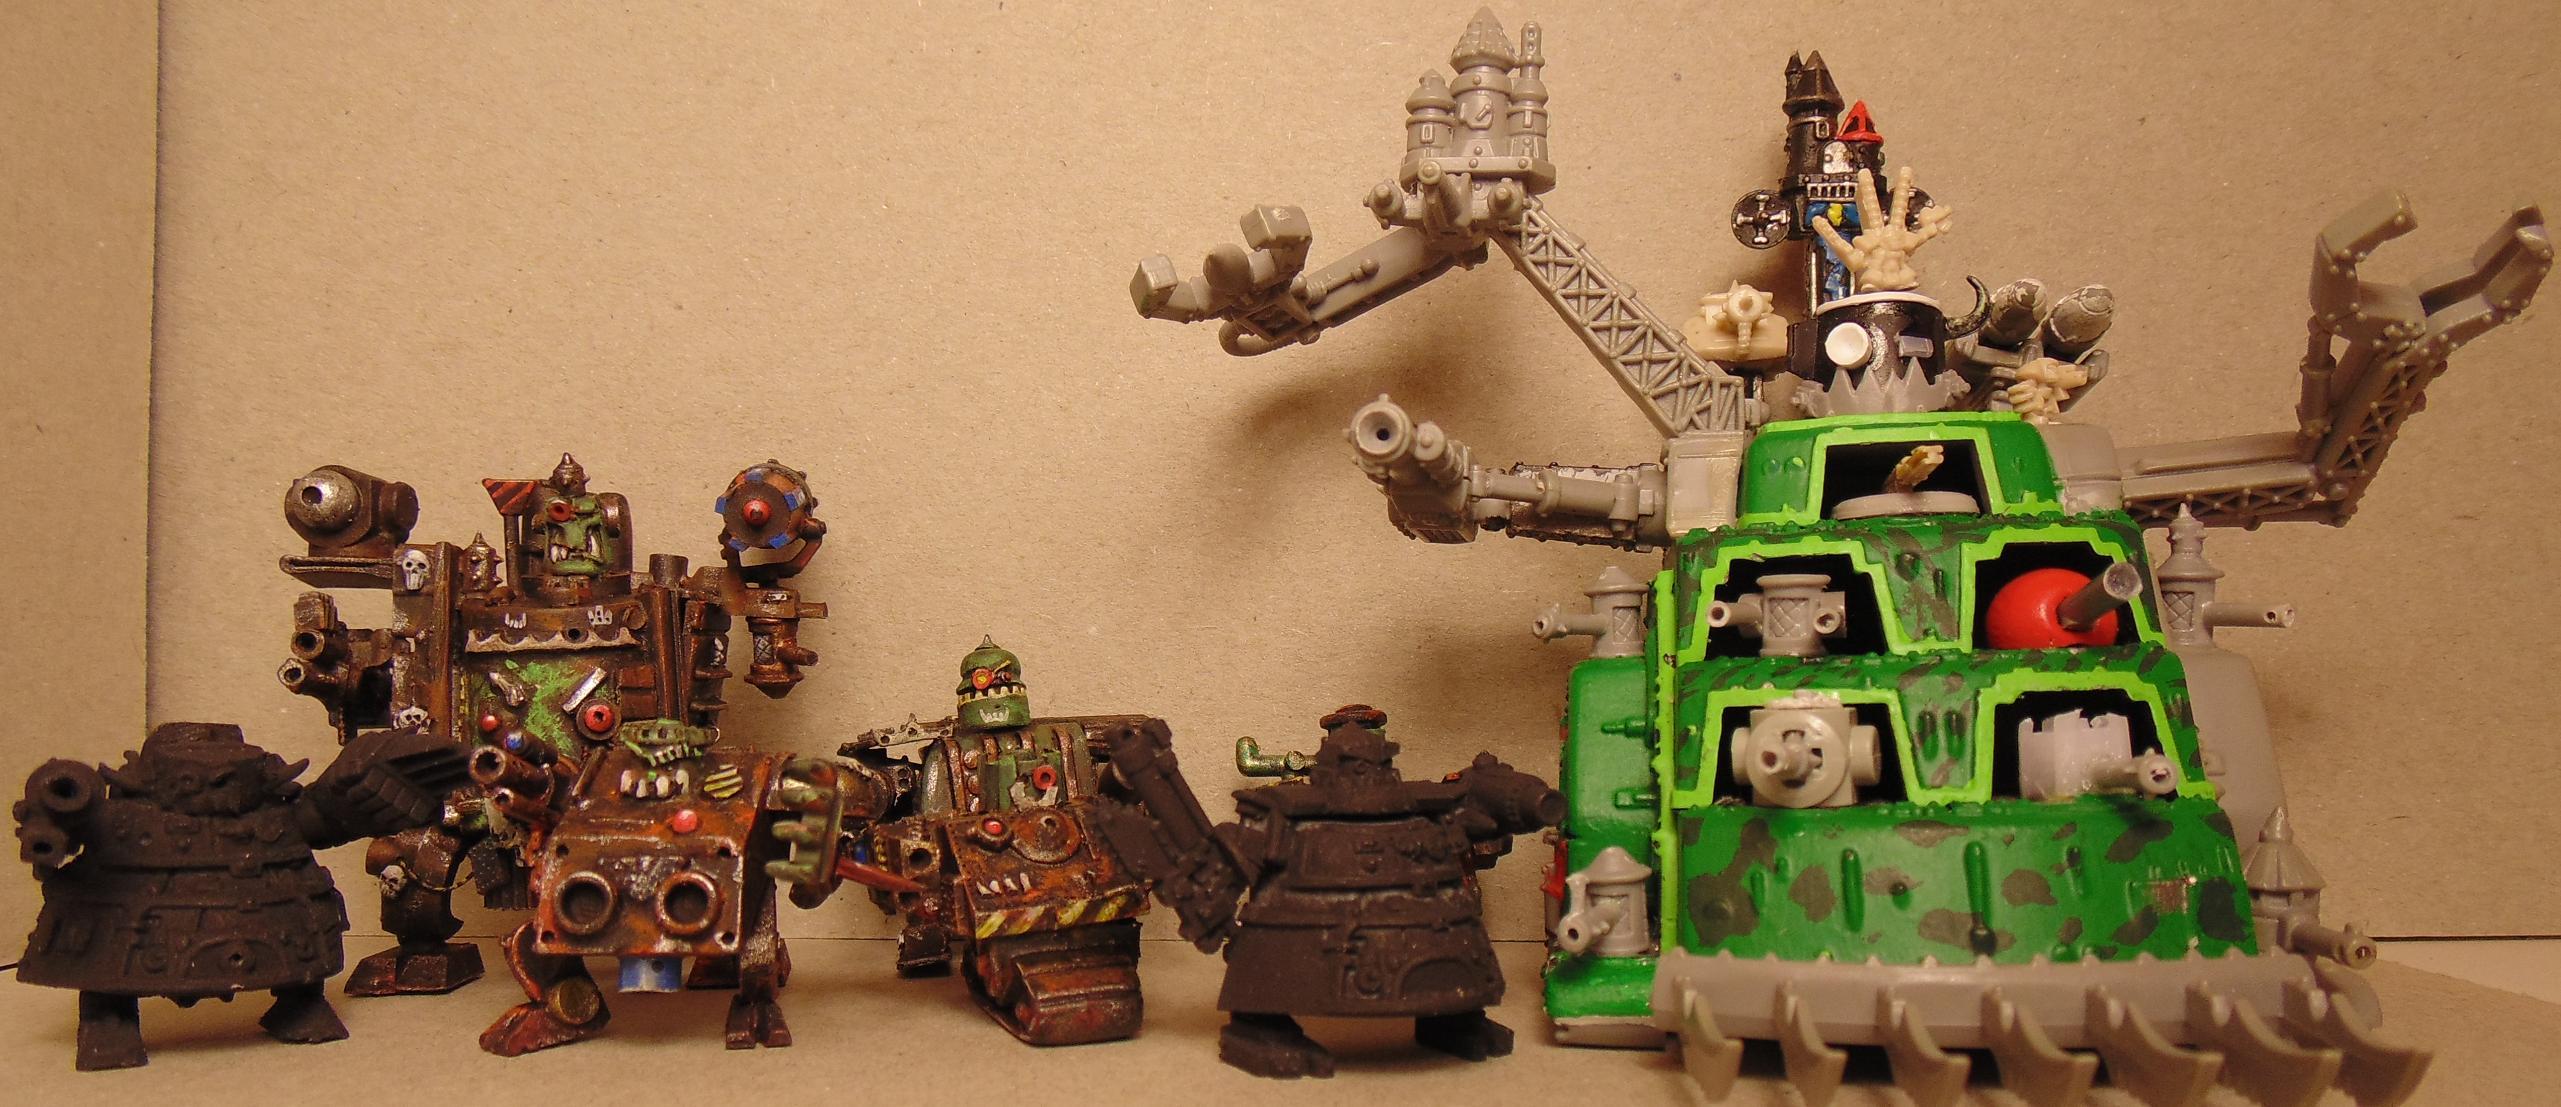 6mm, Army, Comparison, Conversion, Epic, Gargant, Green, Mob, Nob, Oldhammer, Orks, Scratch, Scratch Build, Size, Stampfa, Stompa, Superstompa, Titan, Waaagh, Warhammer 40,000